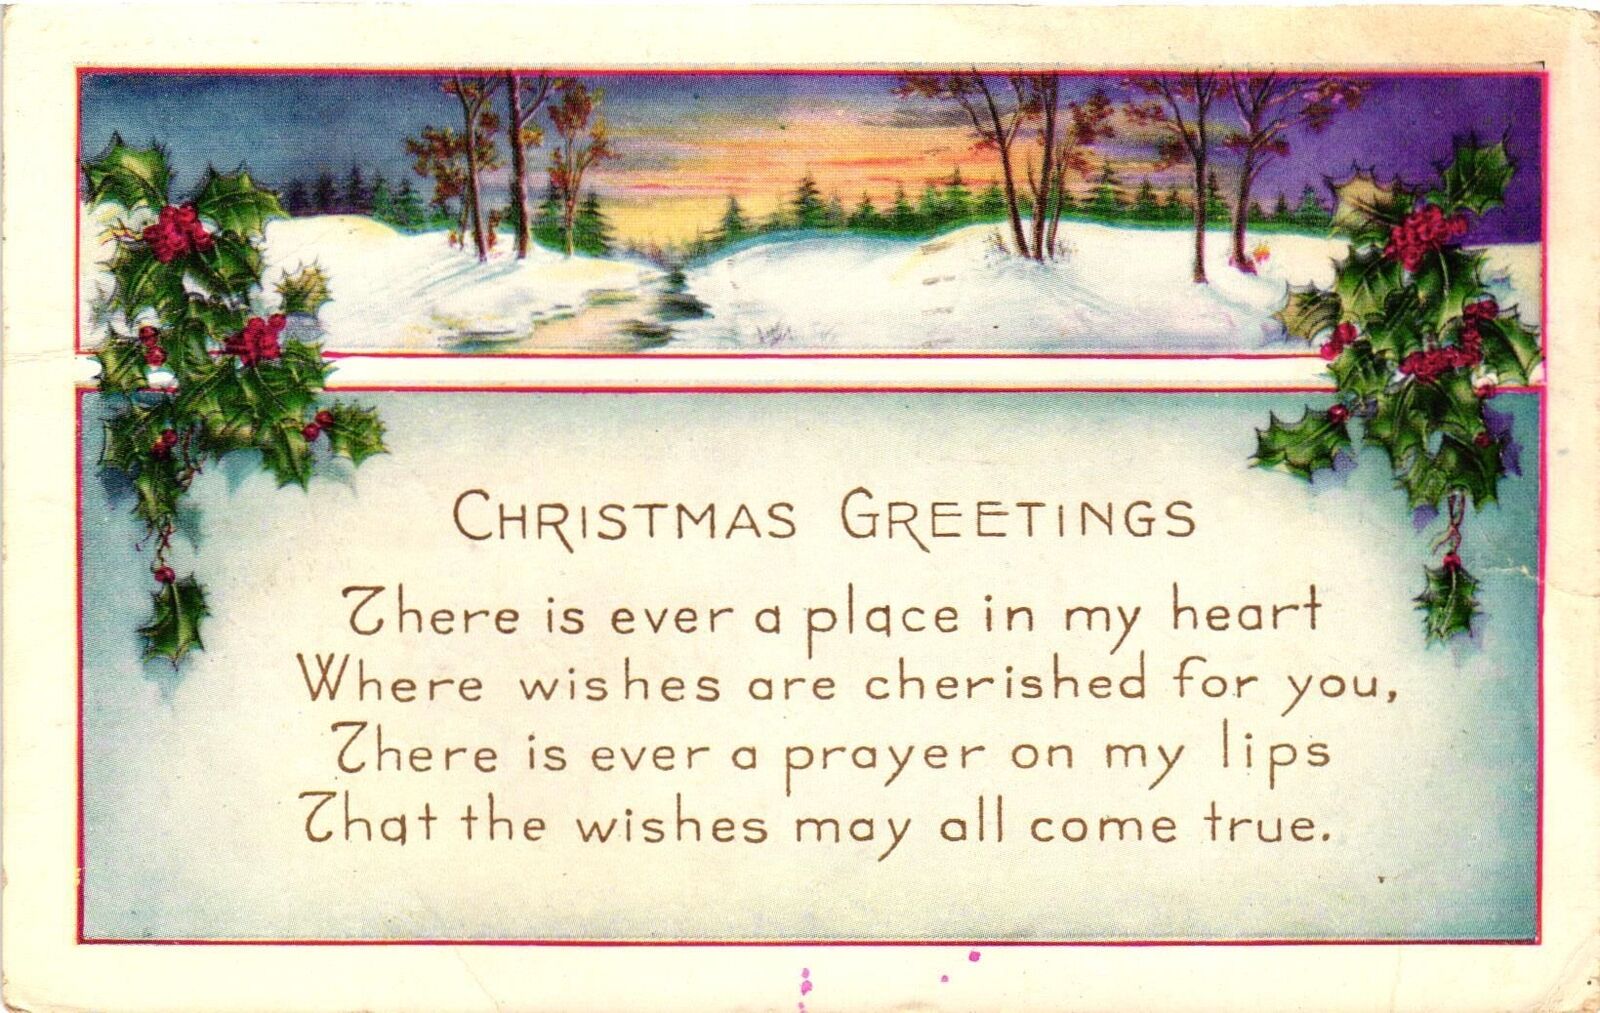 Vintage Postcard- Snowy ground, Christmas Greetings, There is ever a Early 1900s